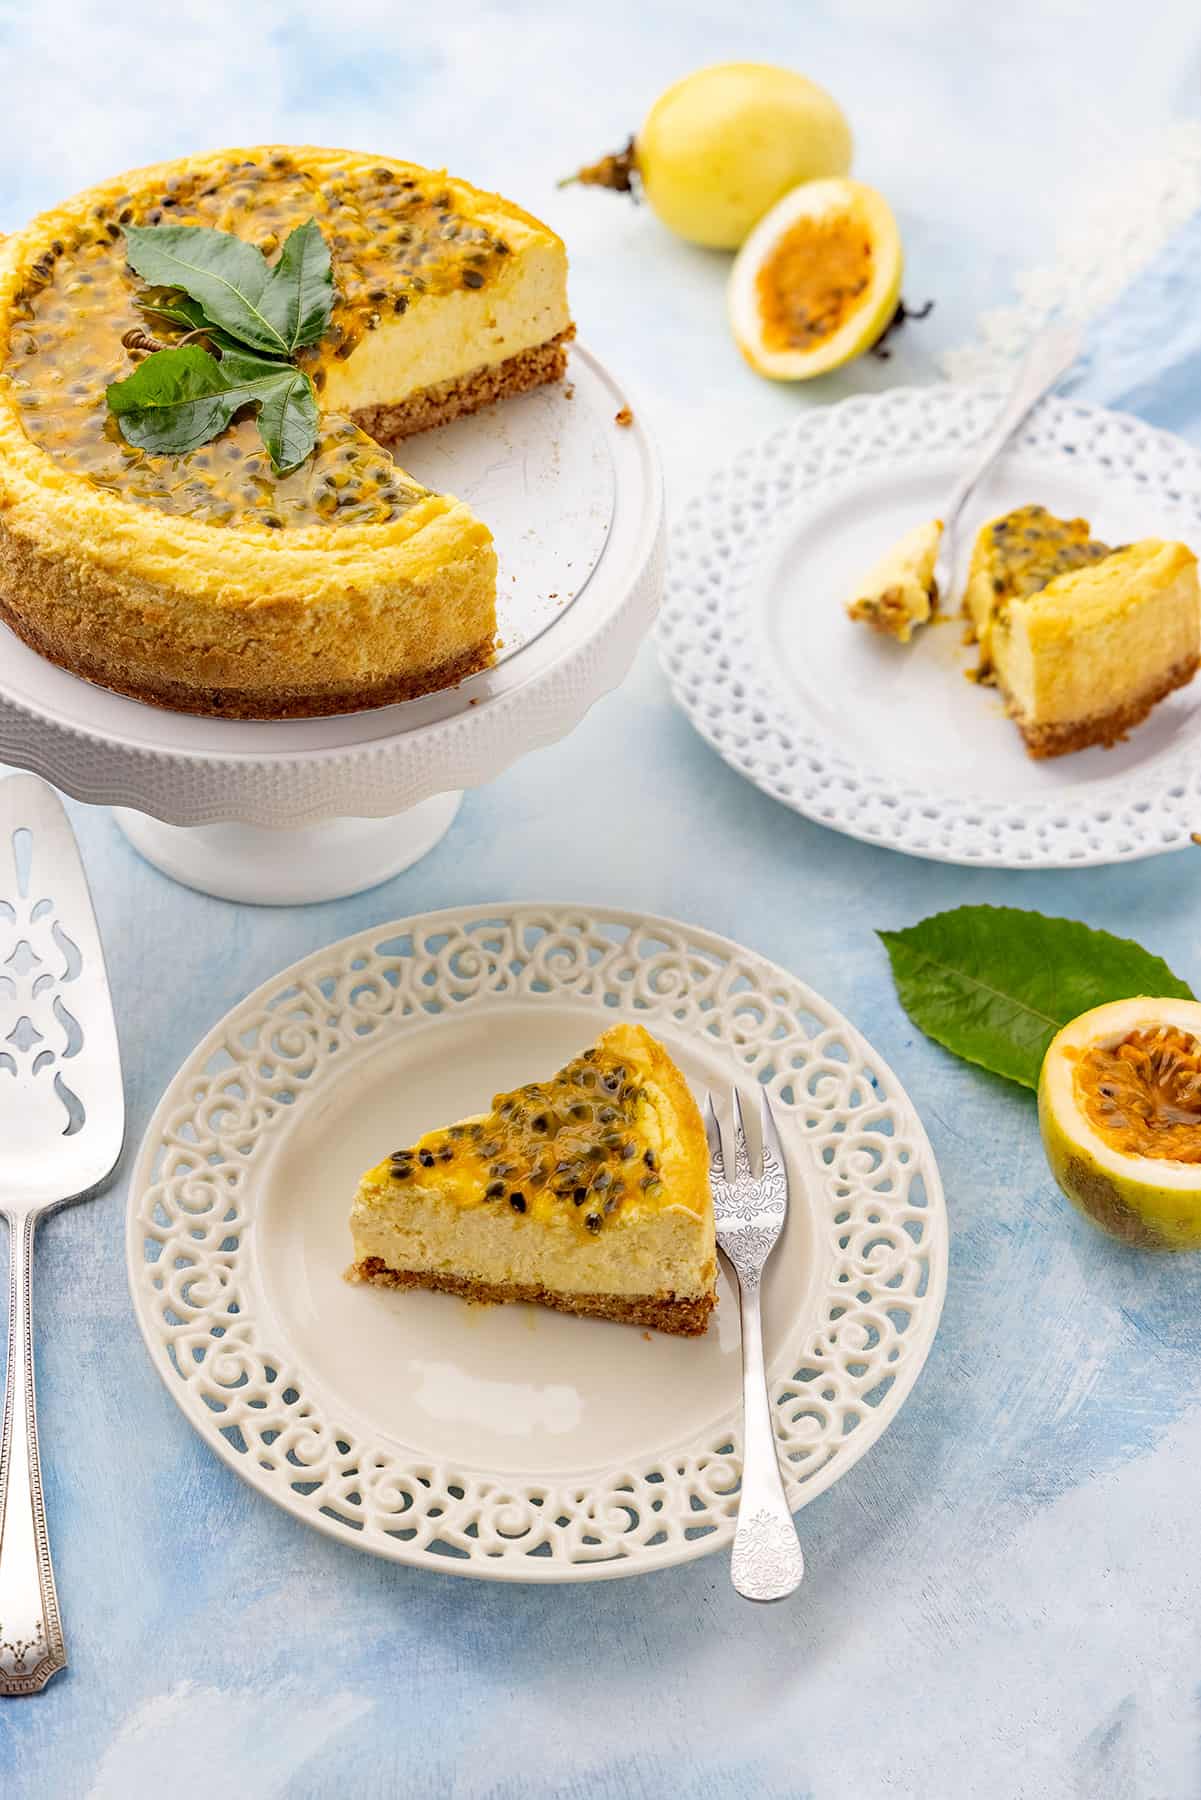 Passion fruit cheesecake.